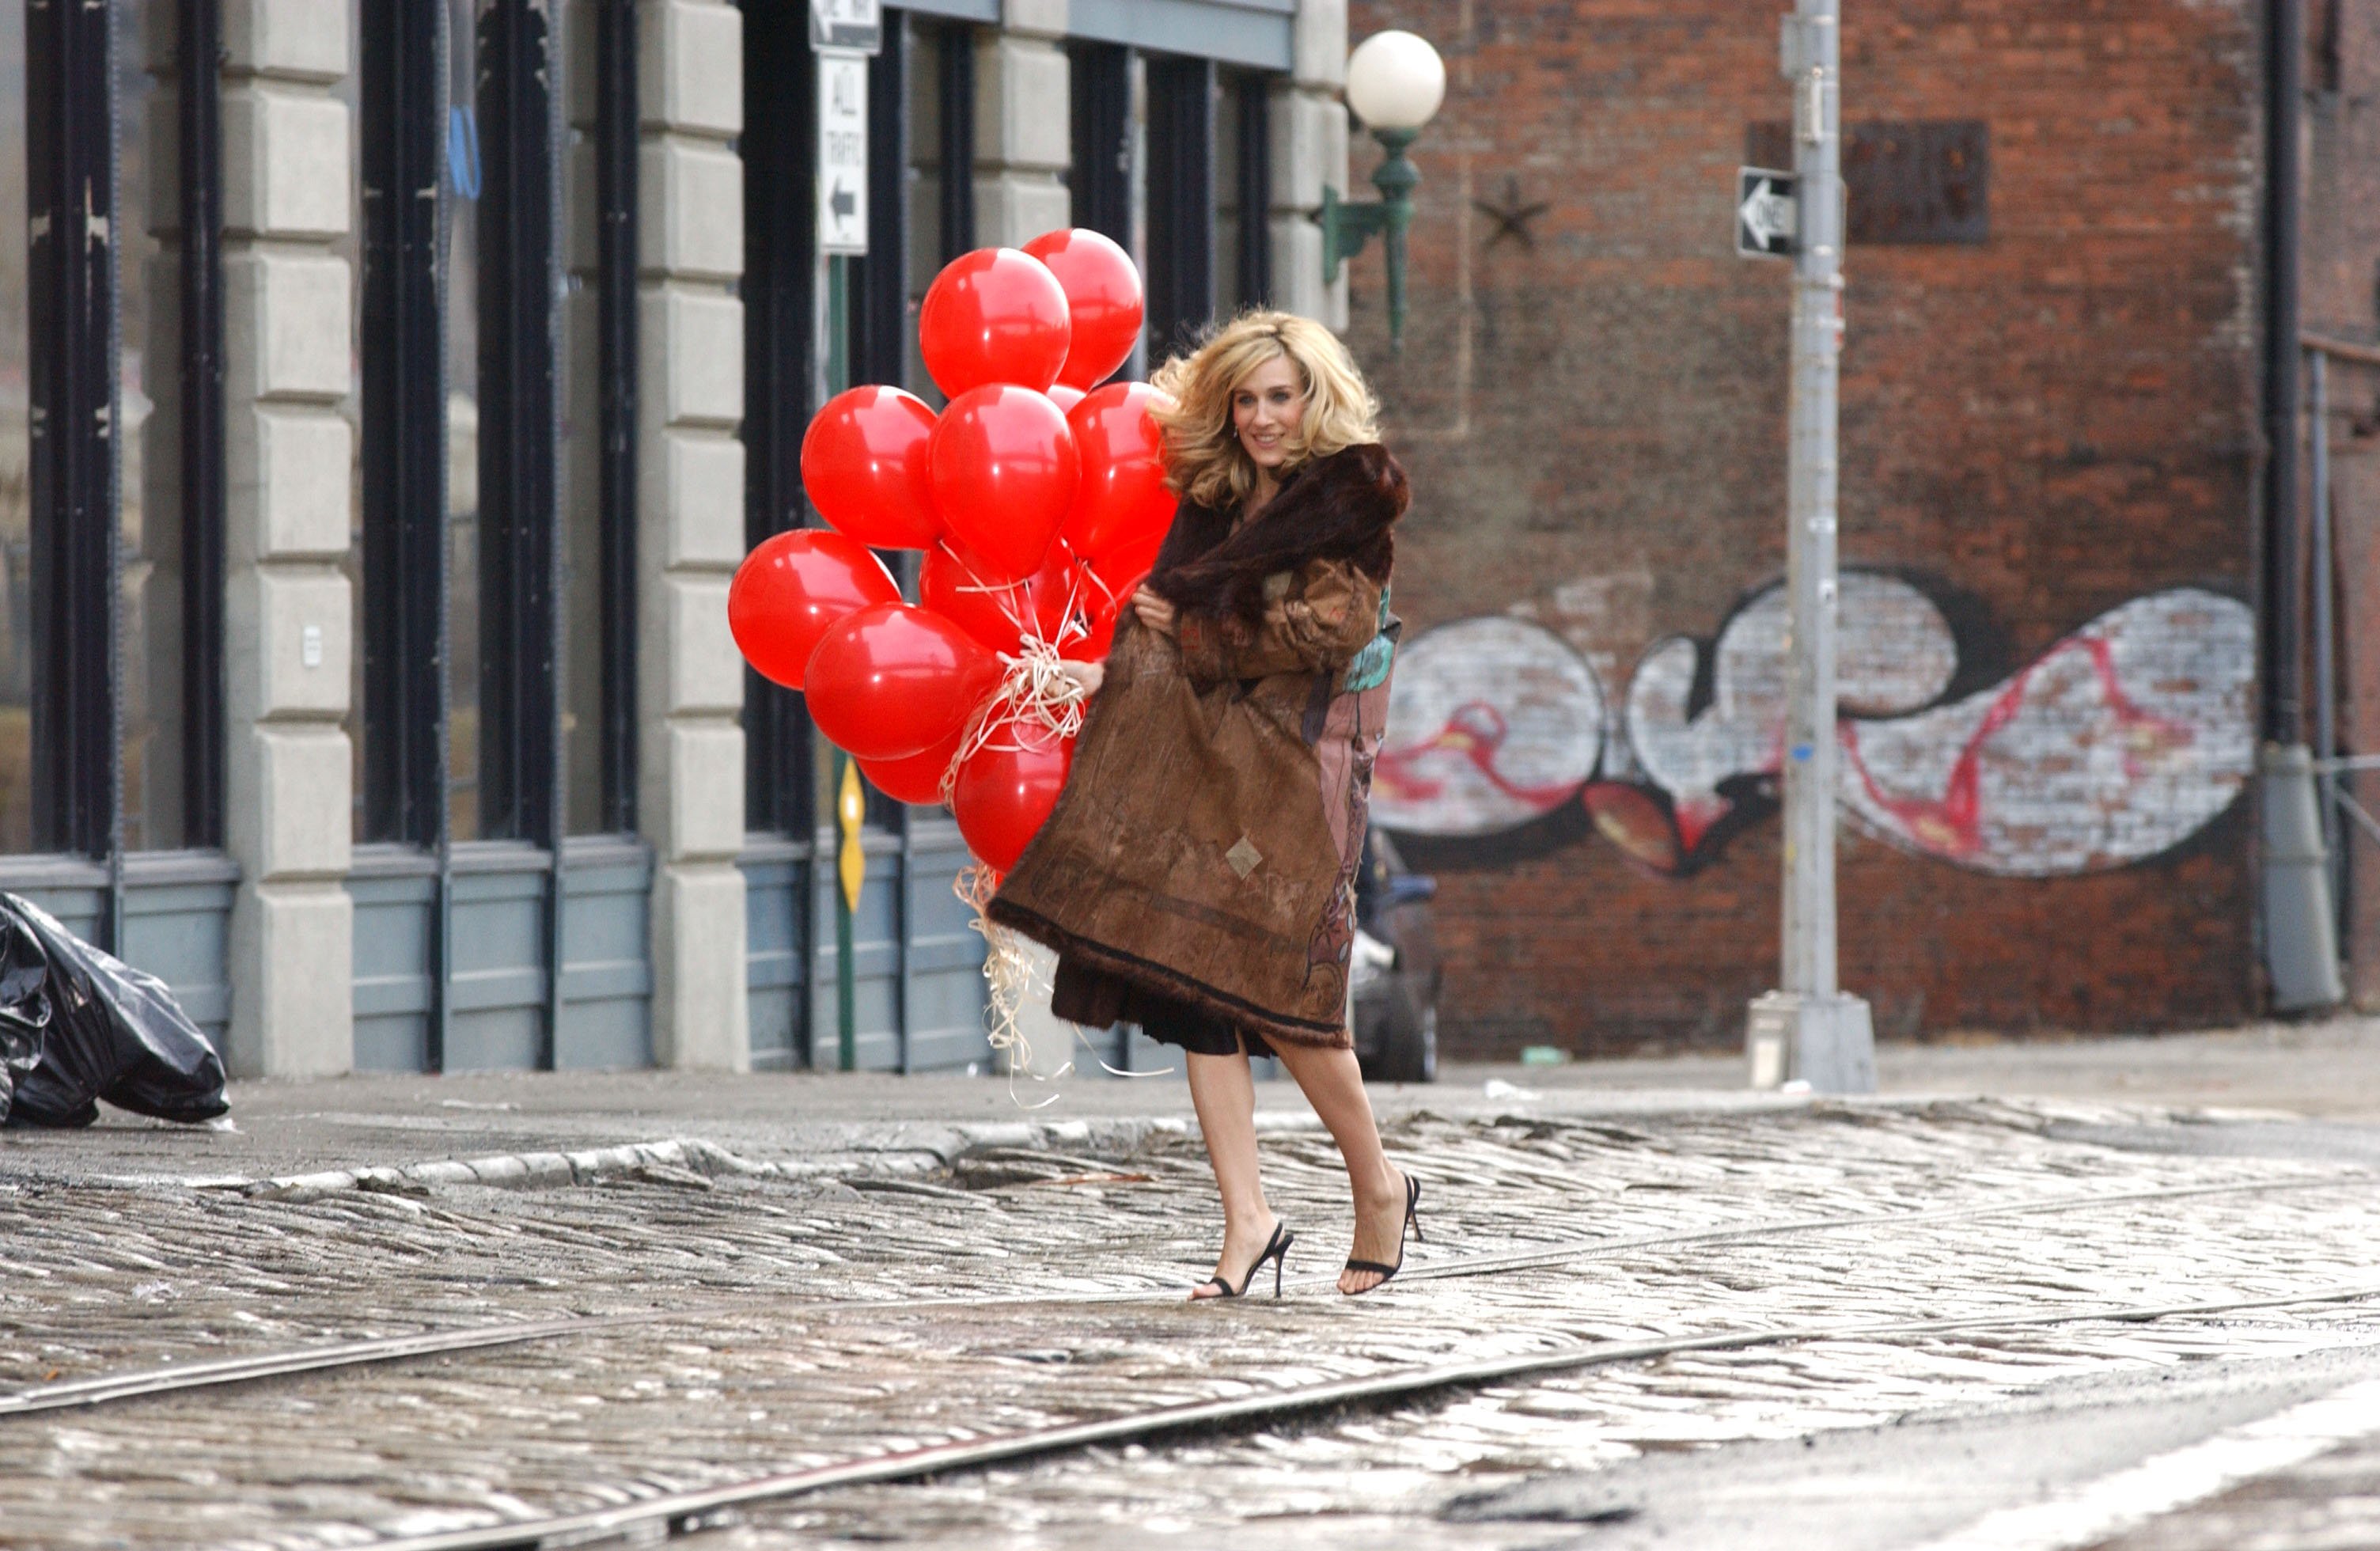 Sarah Jessica Parker in a 'Sex and the City' promo photo